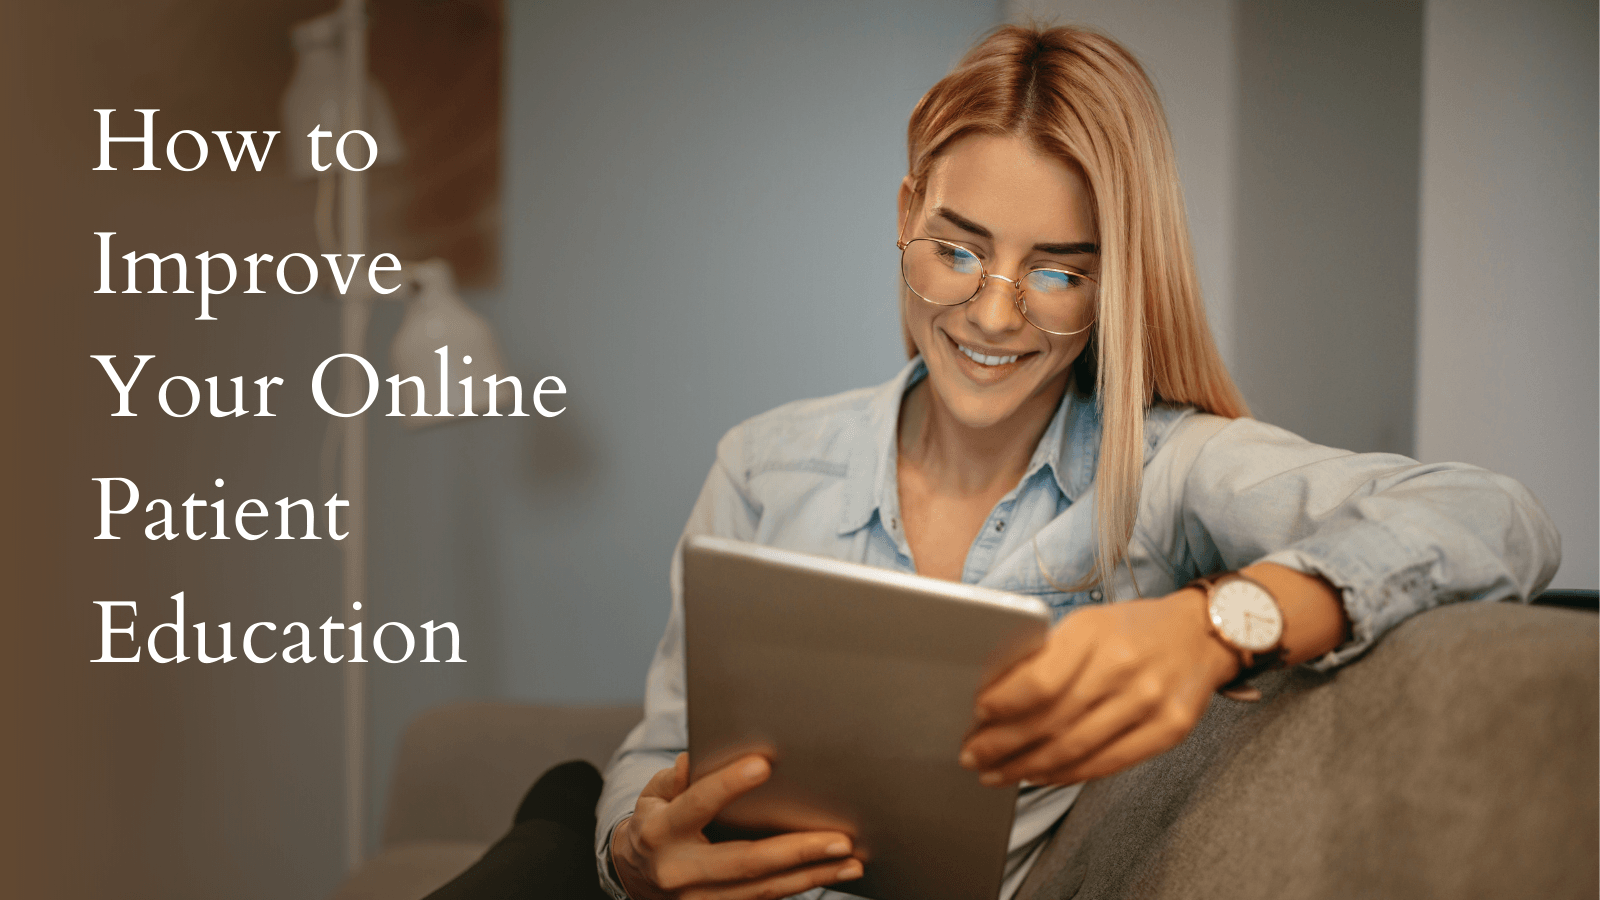 How to Improve Your Online Patient Education